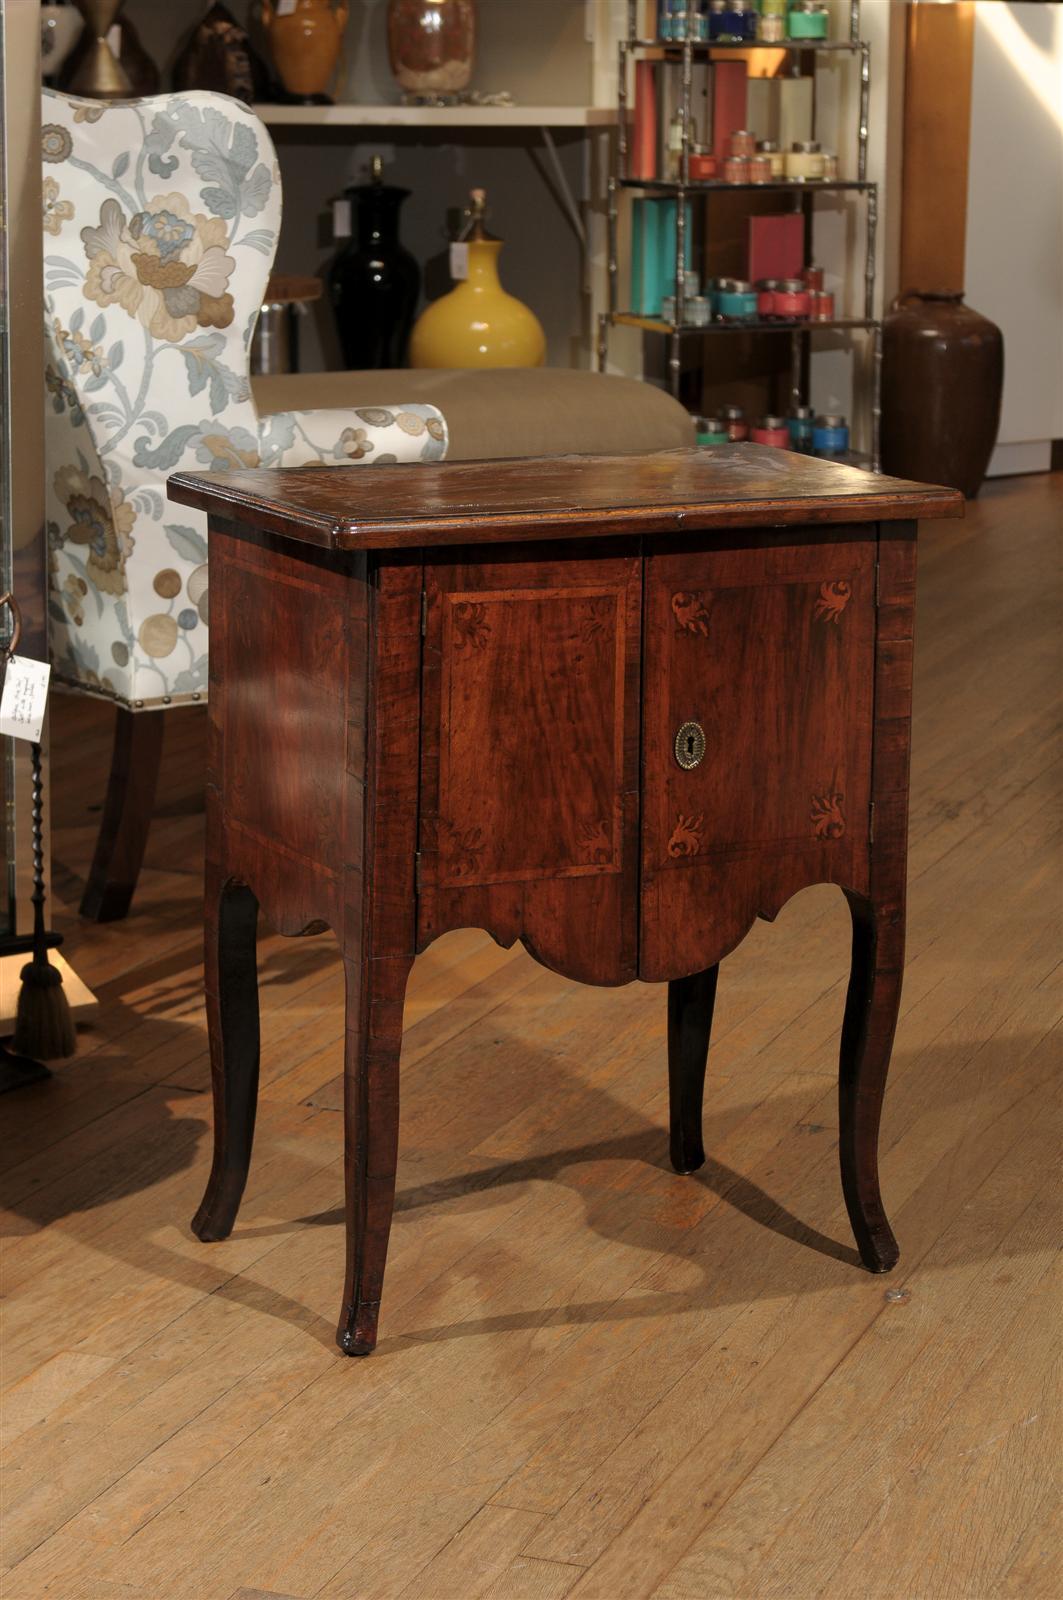 18th century Italian provençal chevet or side table with delicate marquetry and crossbanding on the top, sides and on the hinged two door front. The cabinet is made of walnut, rosewood, and tulipwood and features the original lock. It is raised on